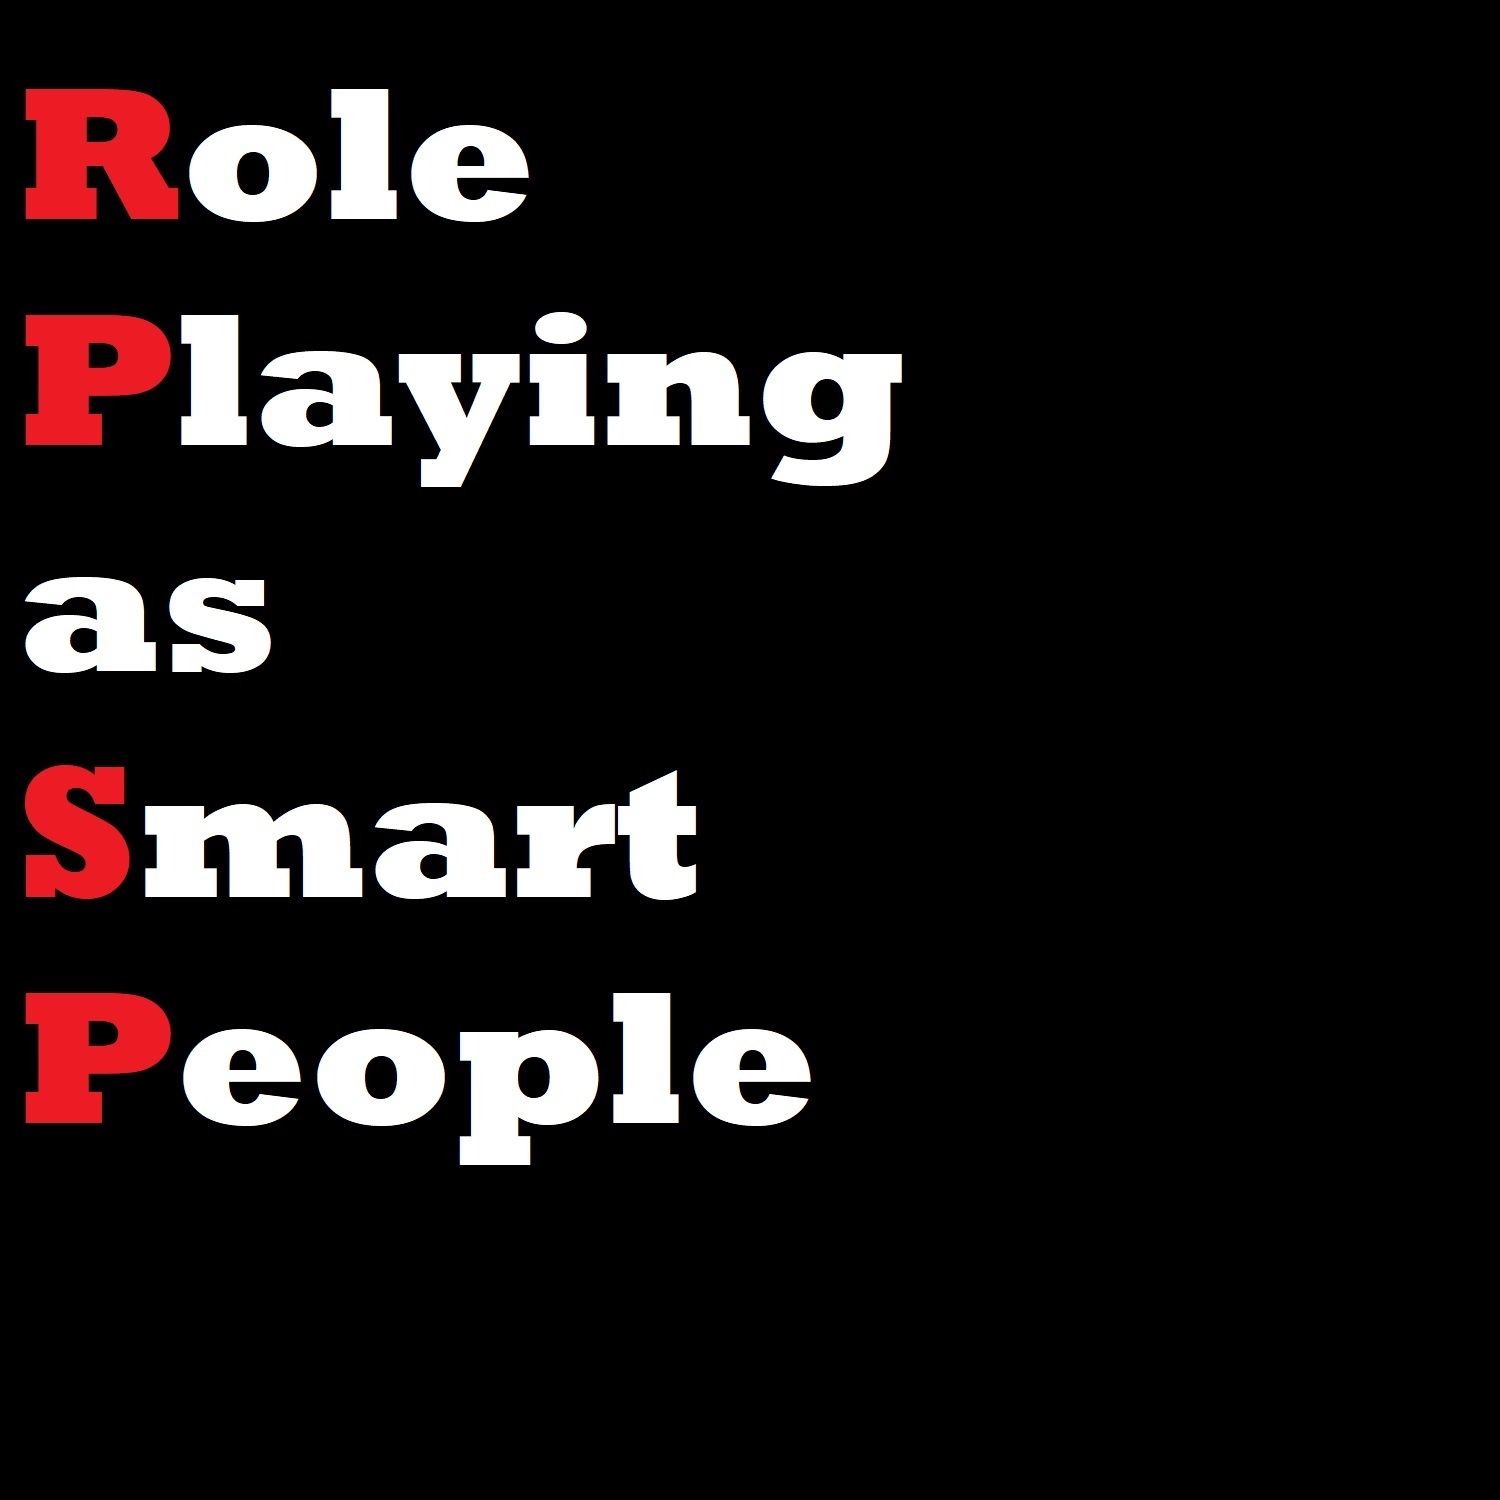 Roleplaying as Smart People